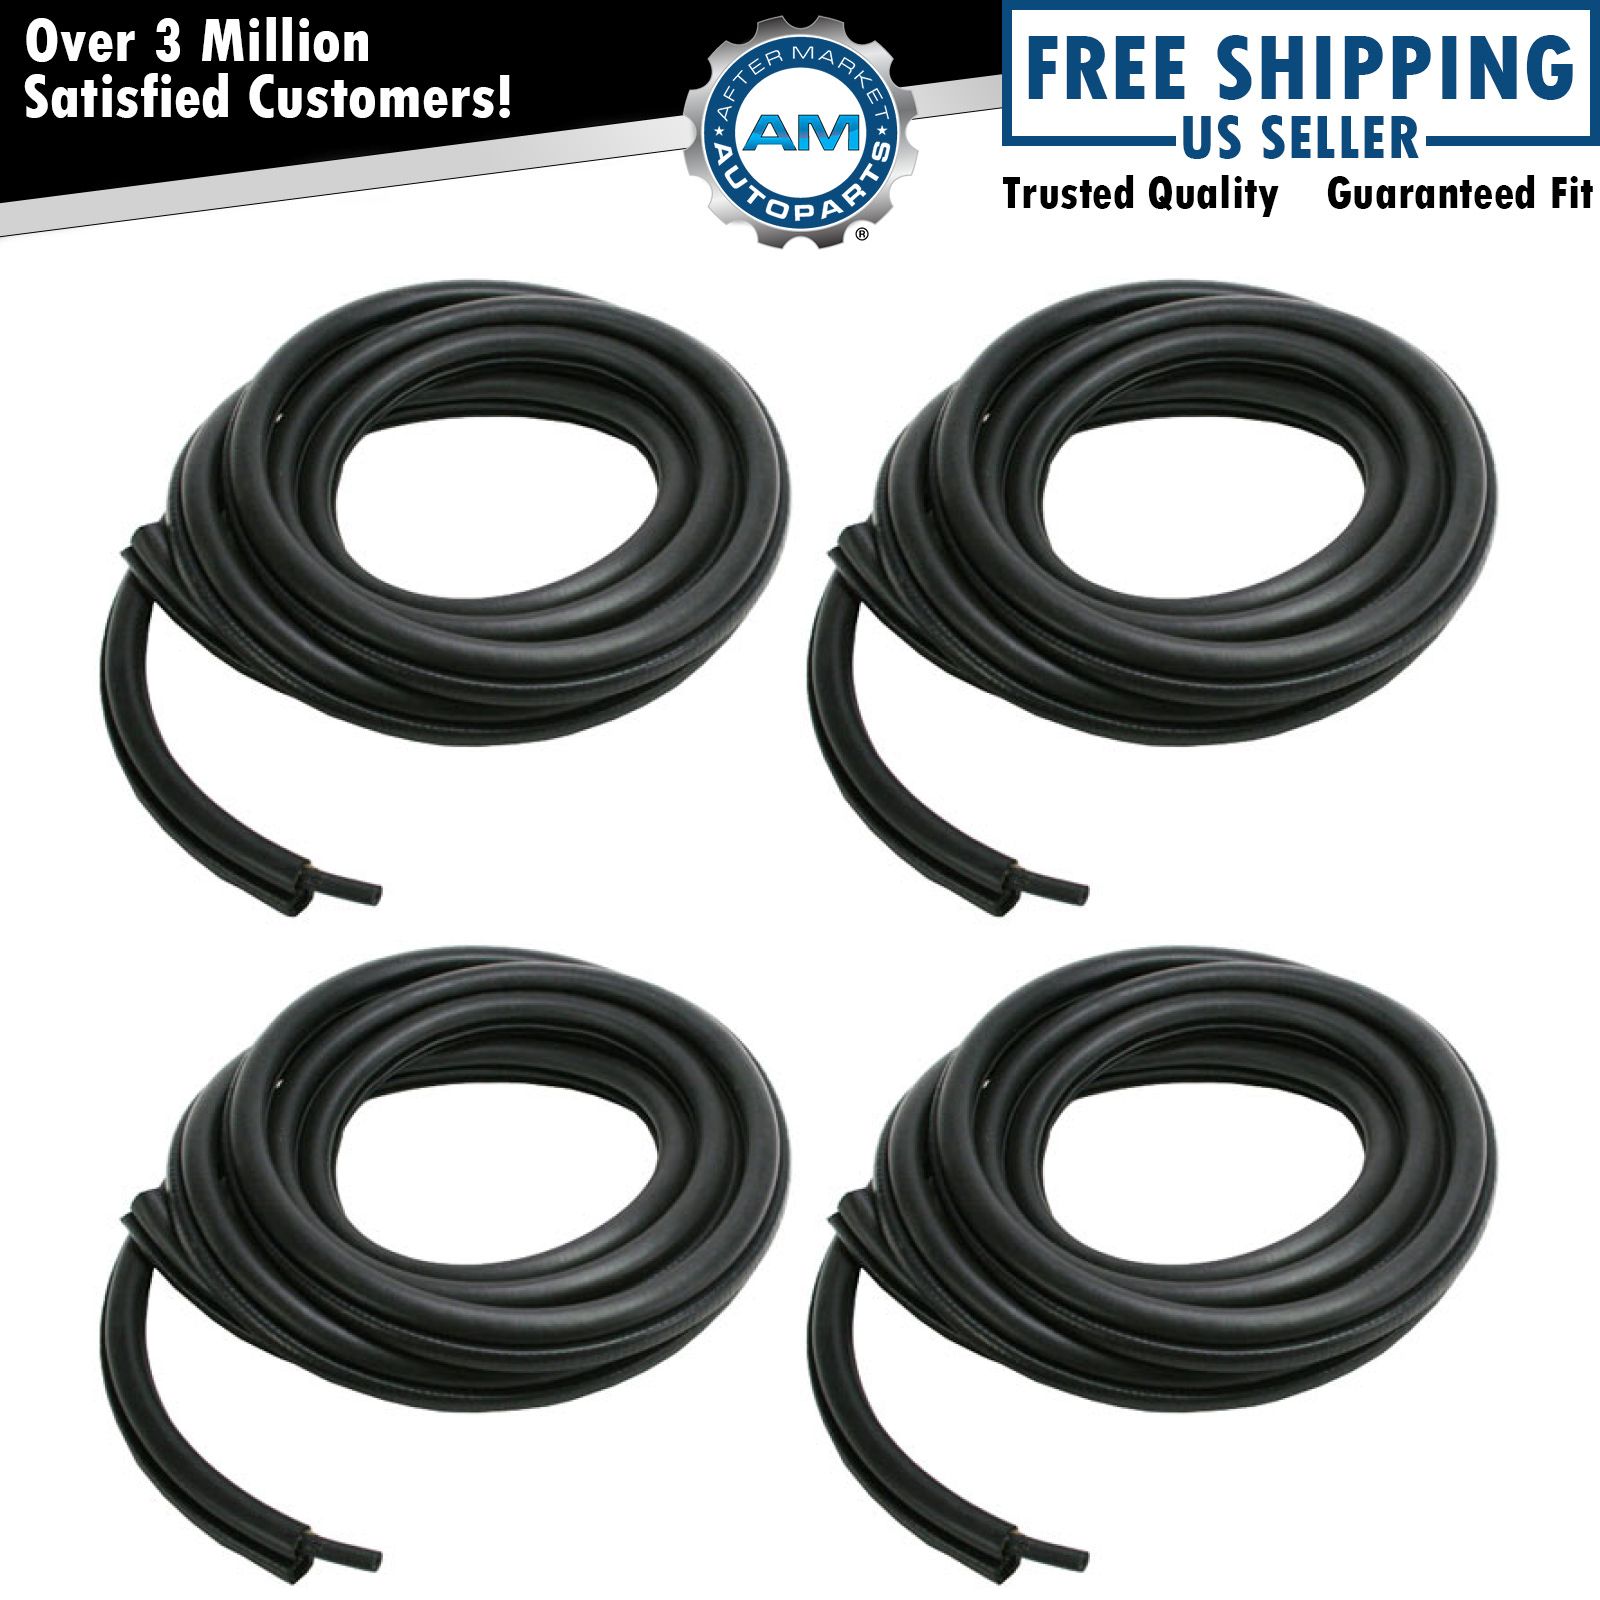 Rubber Weatherstrip Door Seals Front & Rear 4 Pc Set Kit for Jeep Pickup Truck